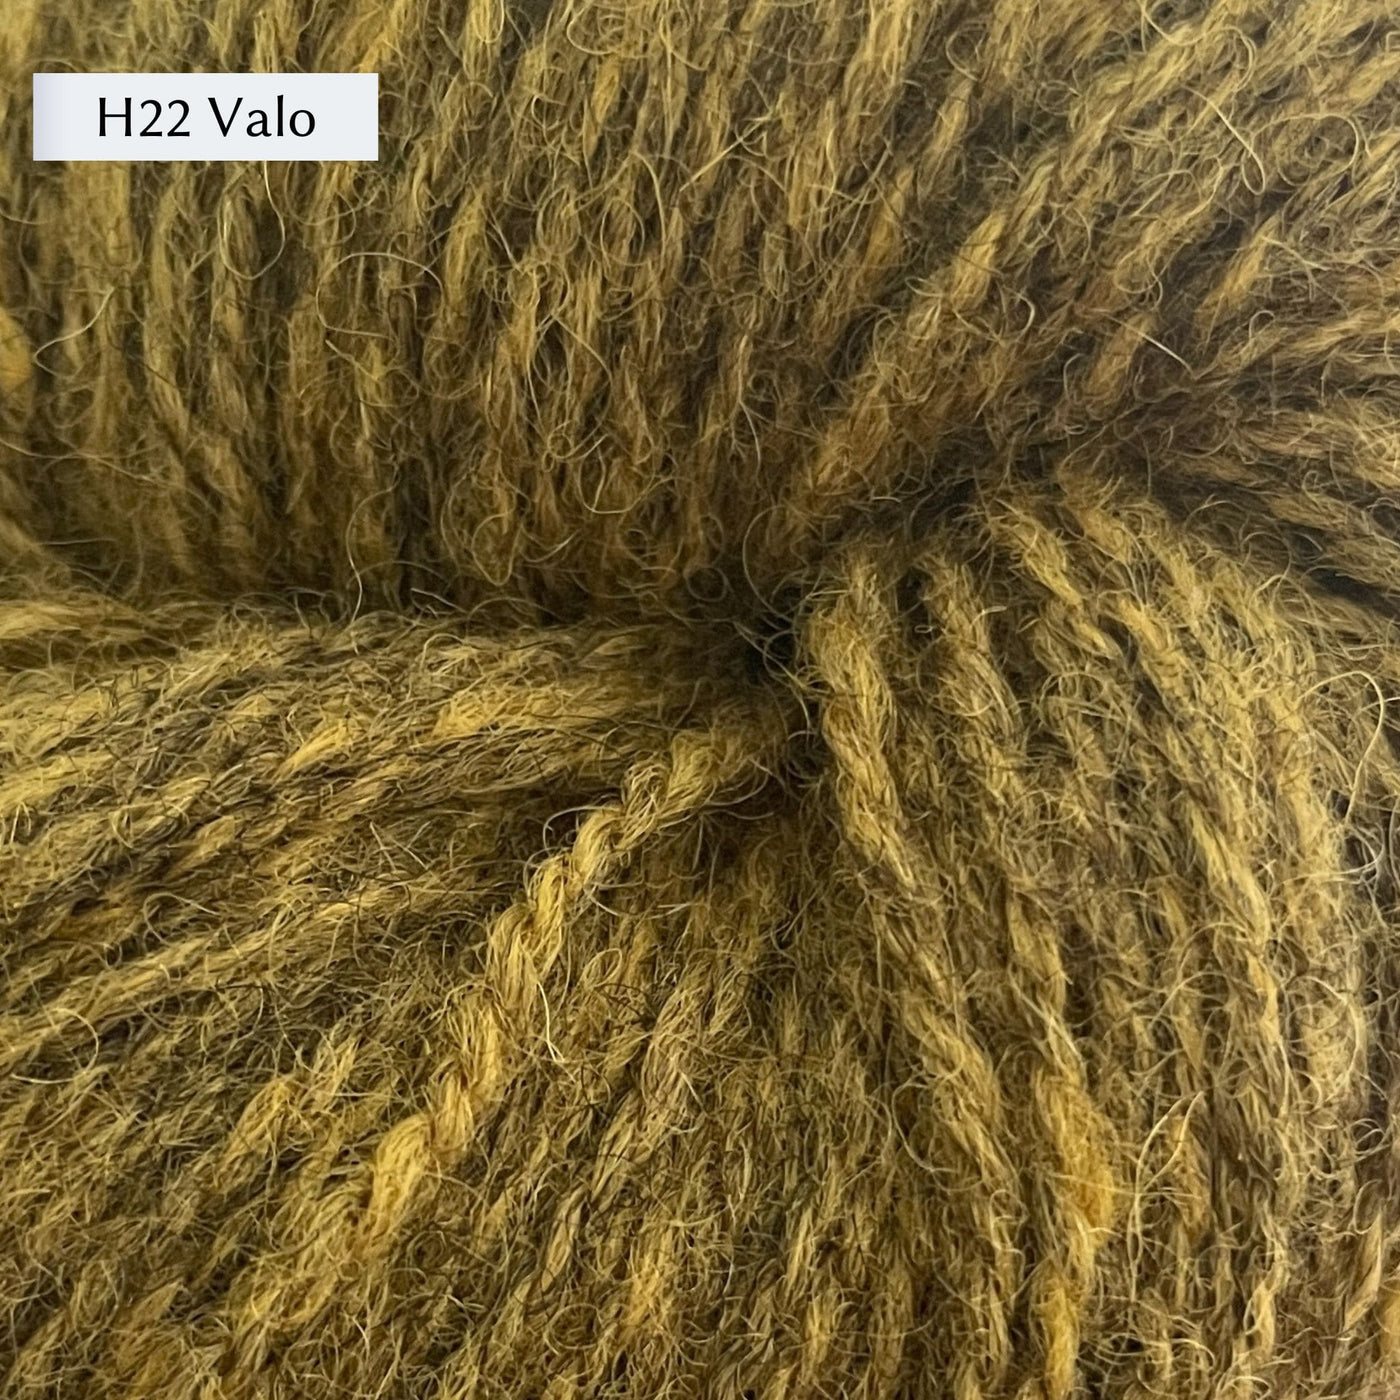 Tukuwool DK Yarn, 100% Finnish Wool shown in colorway H22 Valo which is a heathered green gold. color. 